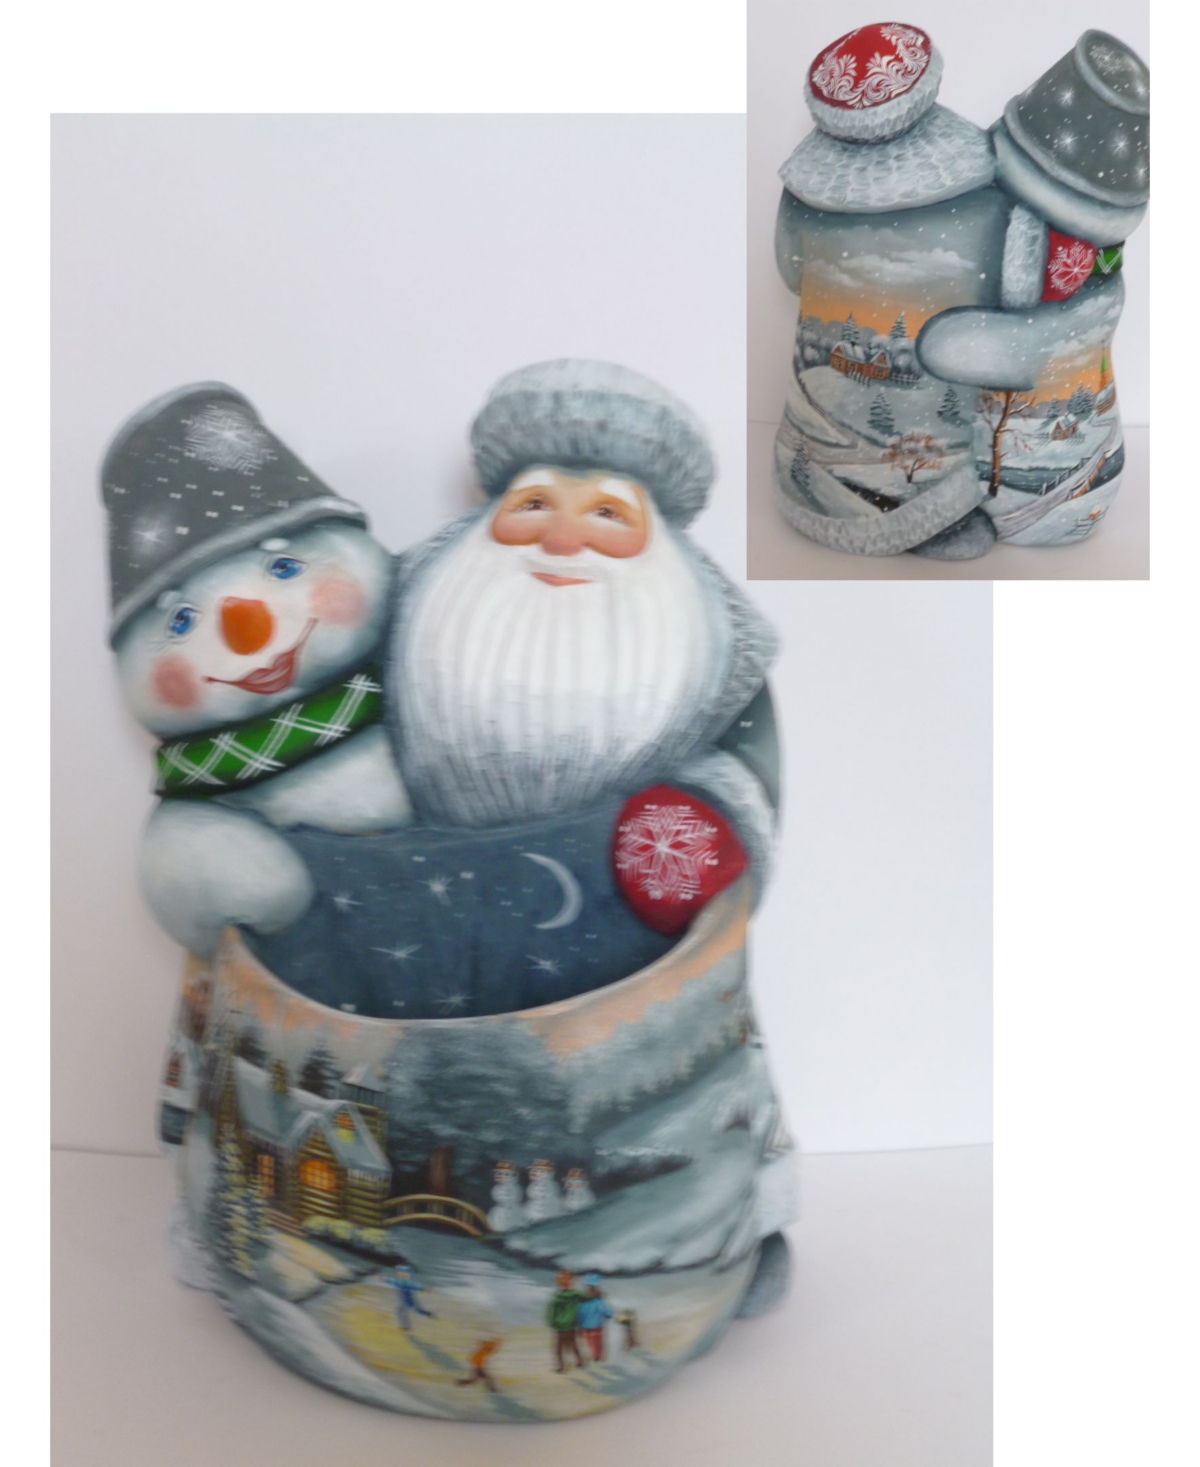 Woodcarved and Hand Painted Santa and Snowman Companions Bag Masterpiece Signature Figurine - Multi